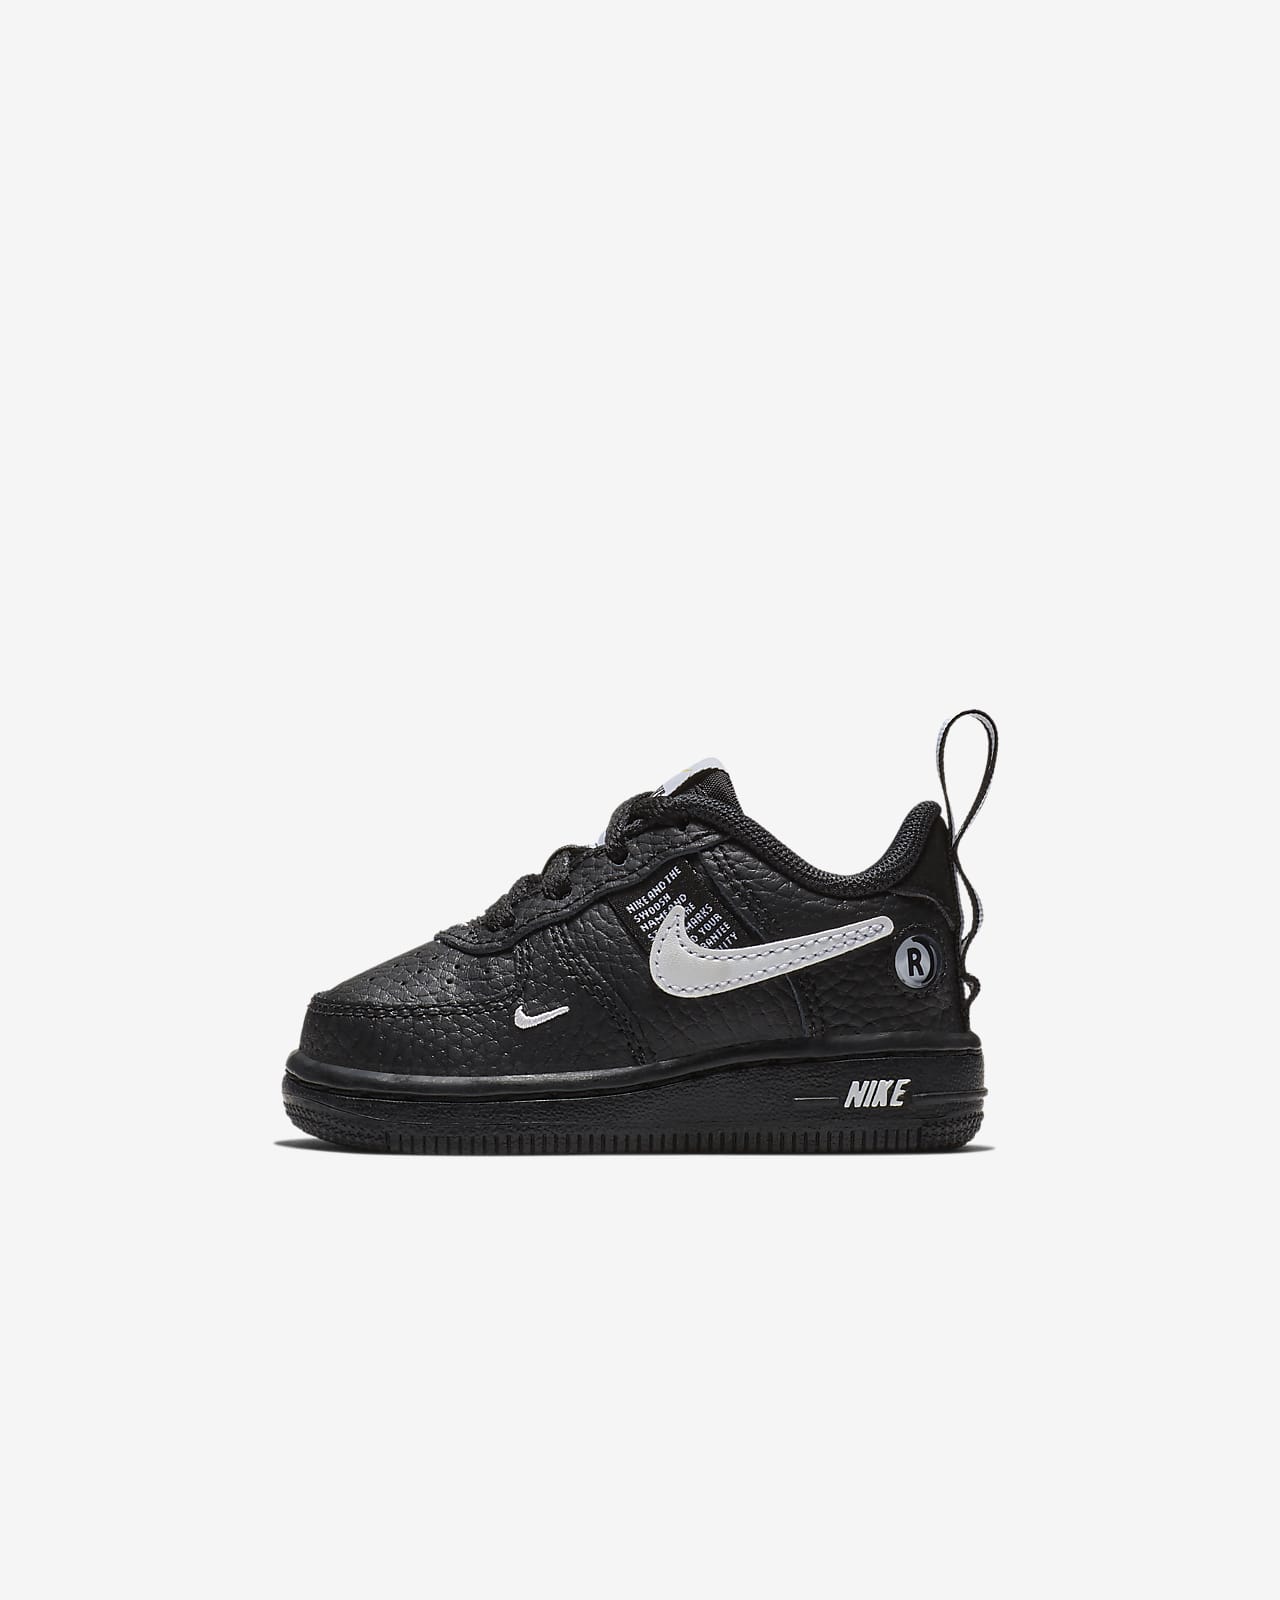 Nike Force 1 LV8 2 Baby/Toddler Shoes